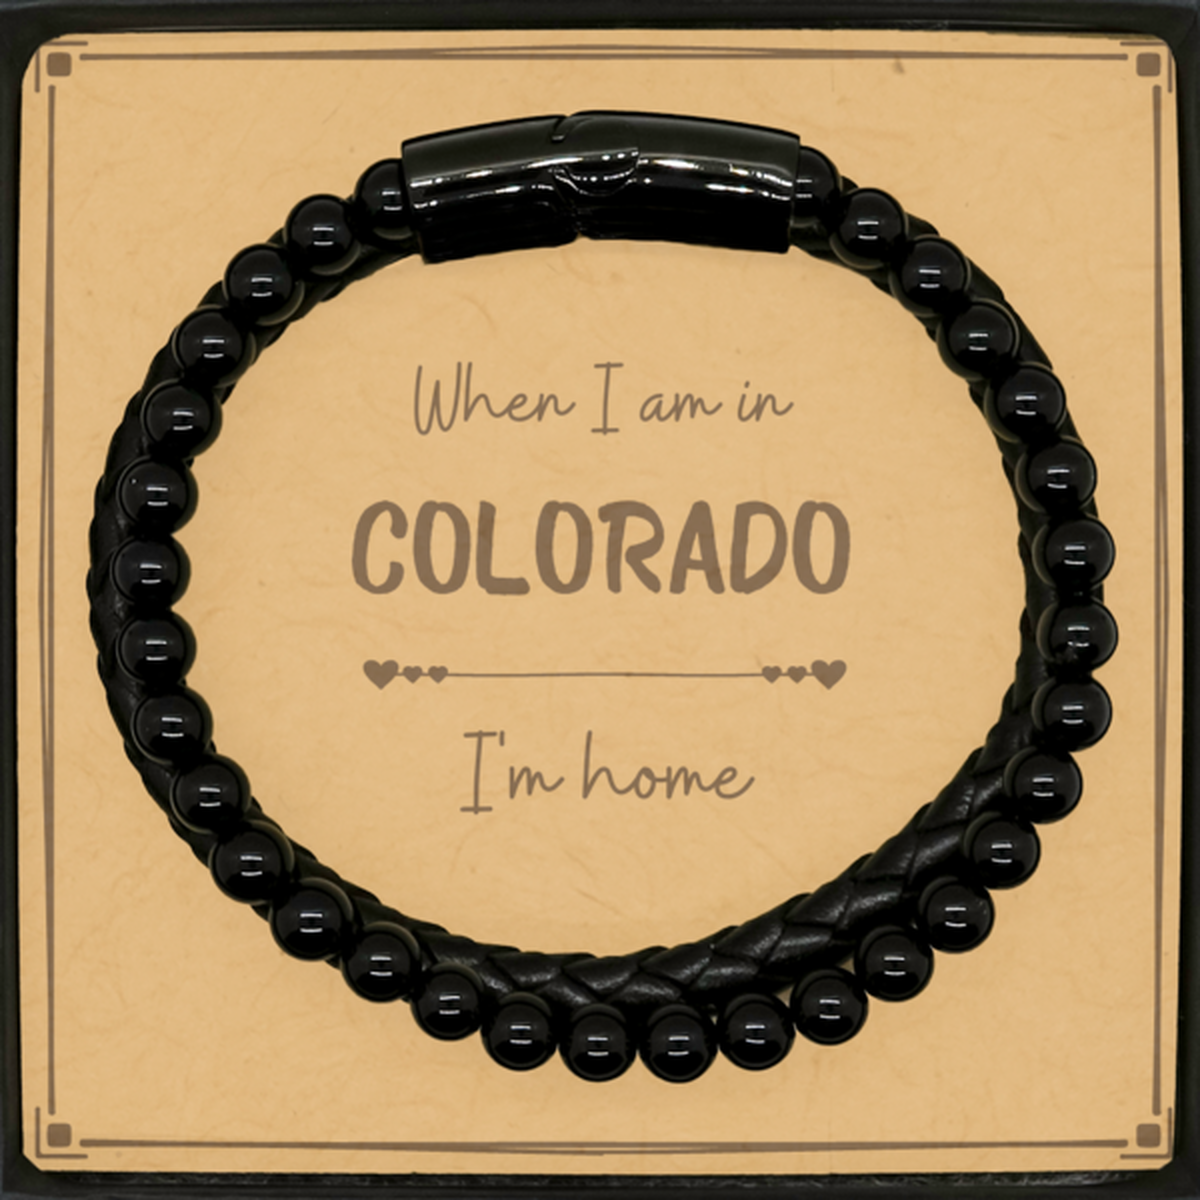 When I am in Colorado I'm home Stone Leather Bracelets, Message Card Gifts For Colorado, State Colorado Birthday Gifts for Friends Coworker